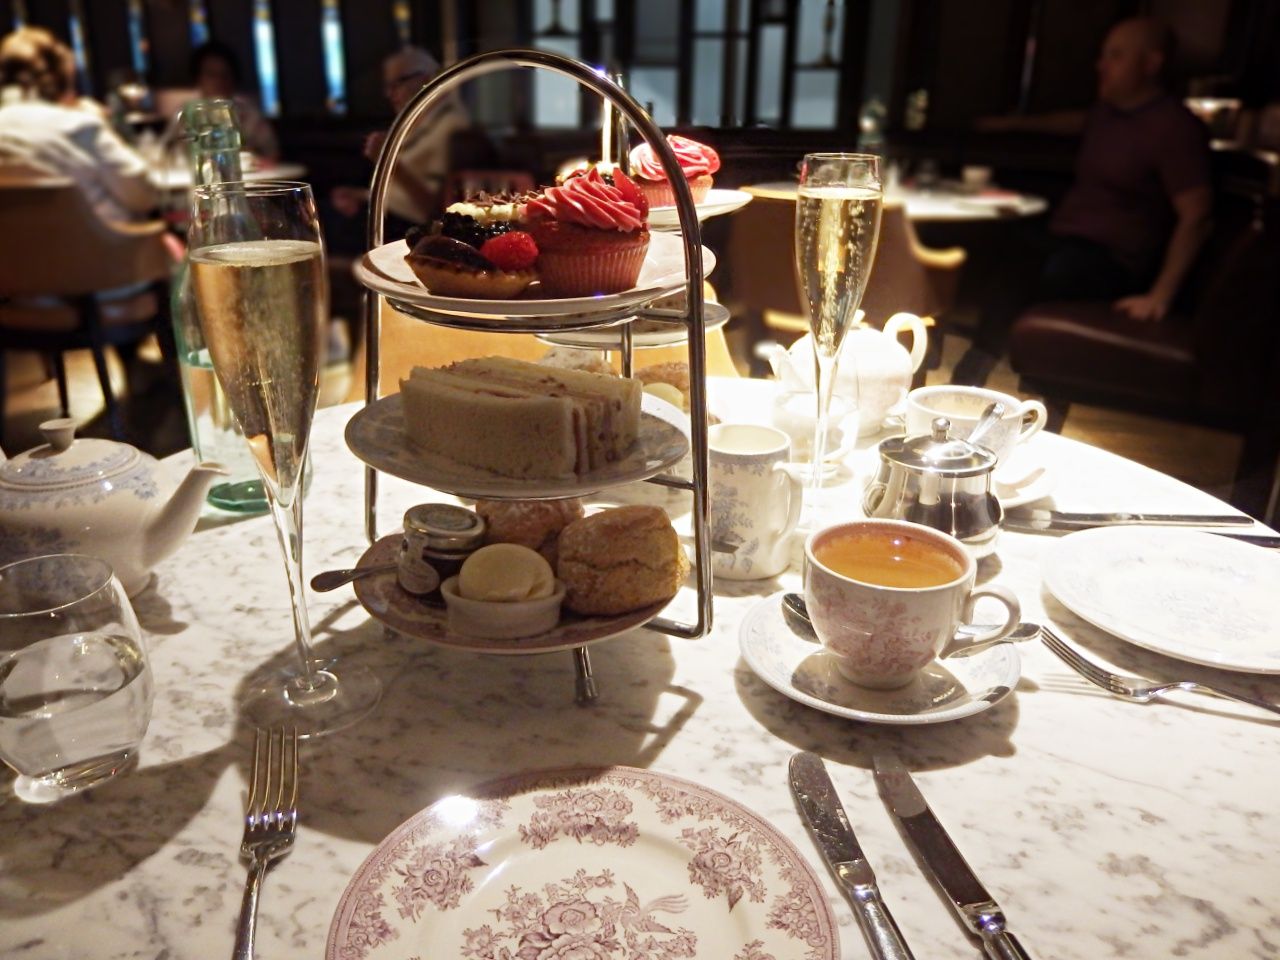 Afternoon tea at the strand dining rooms